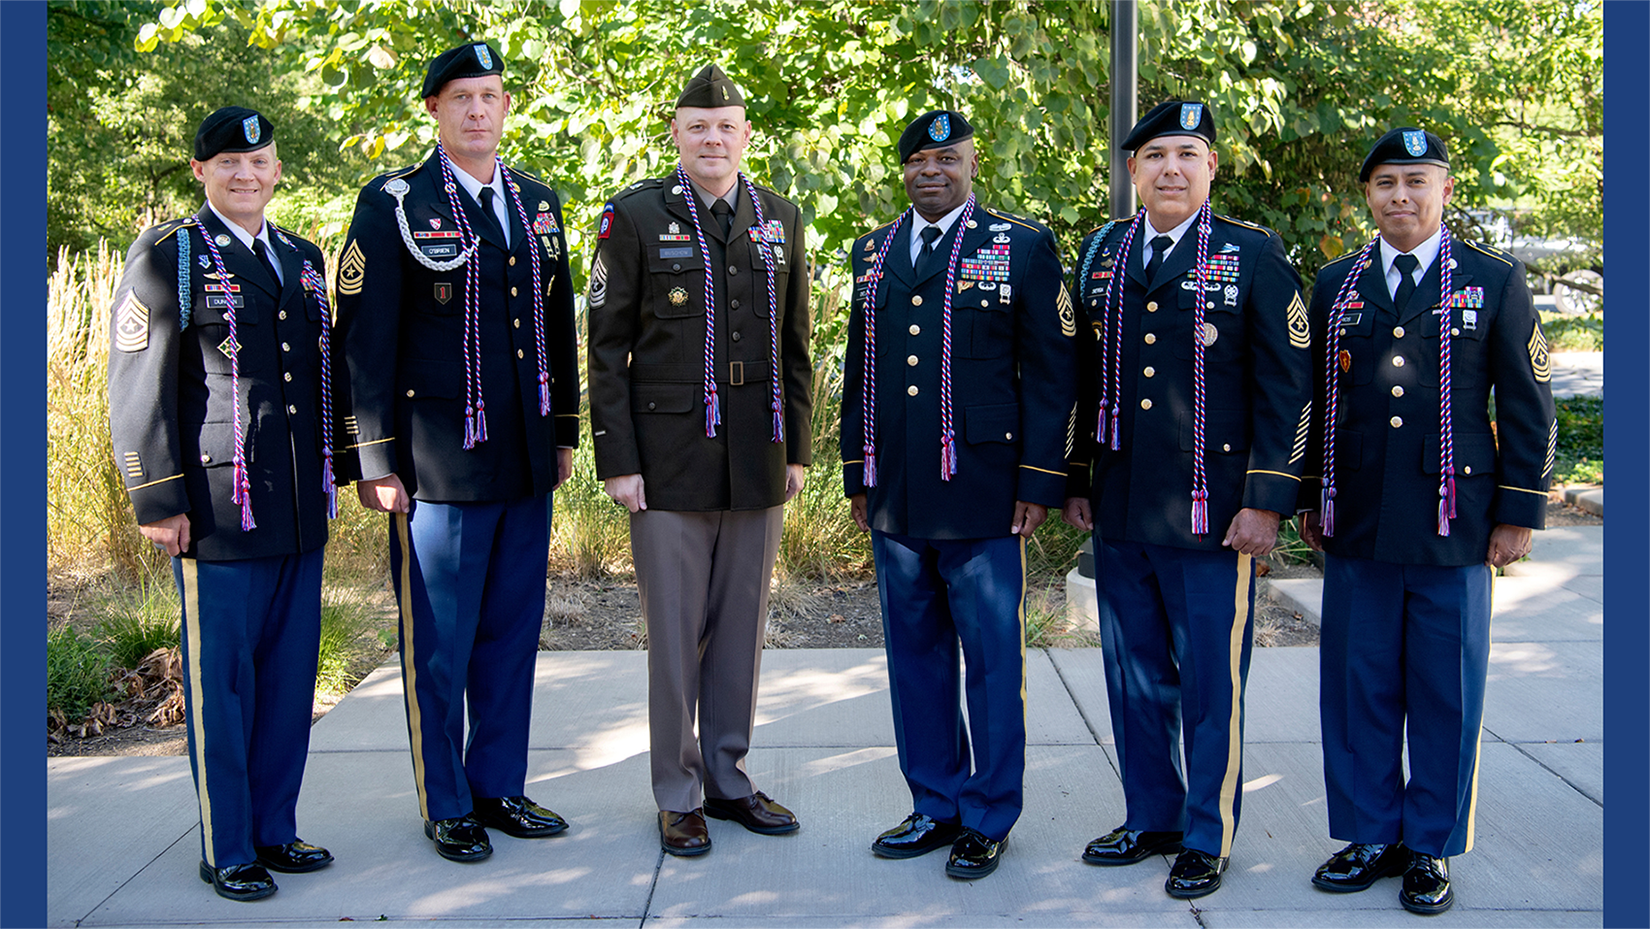 Six men in dress military uniforms pose outside.